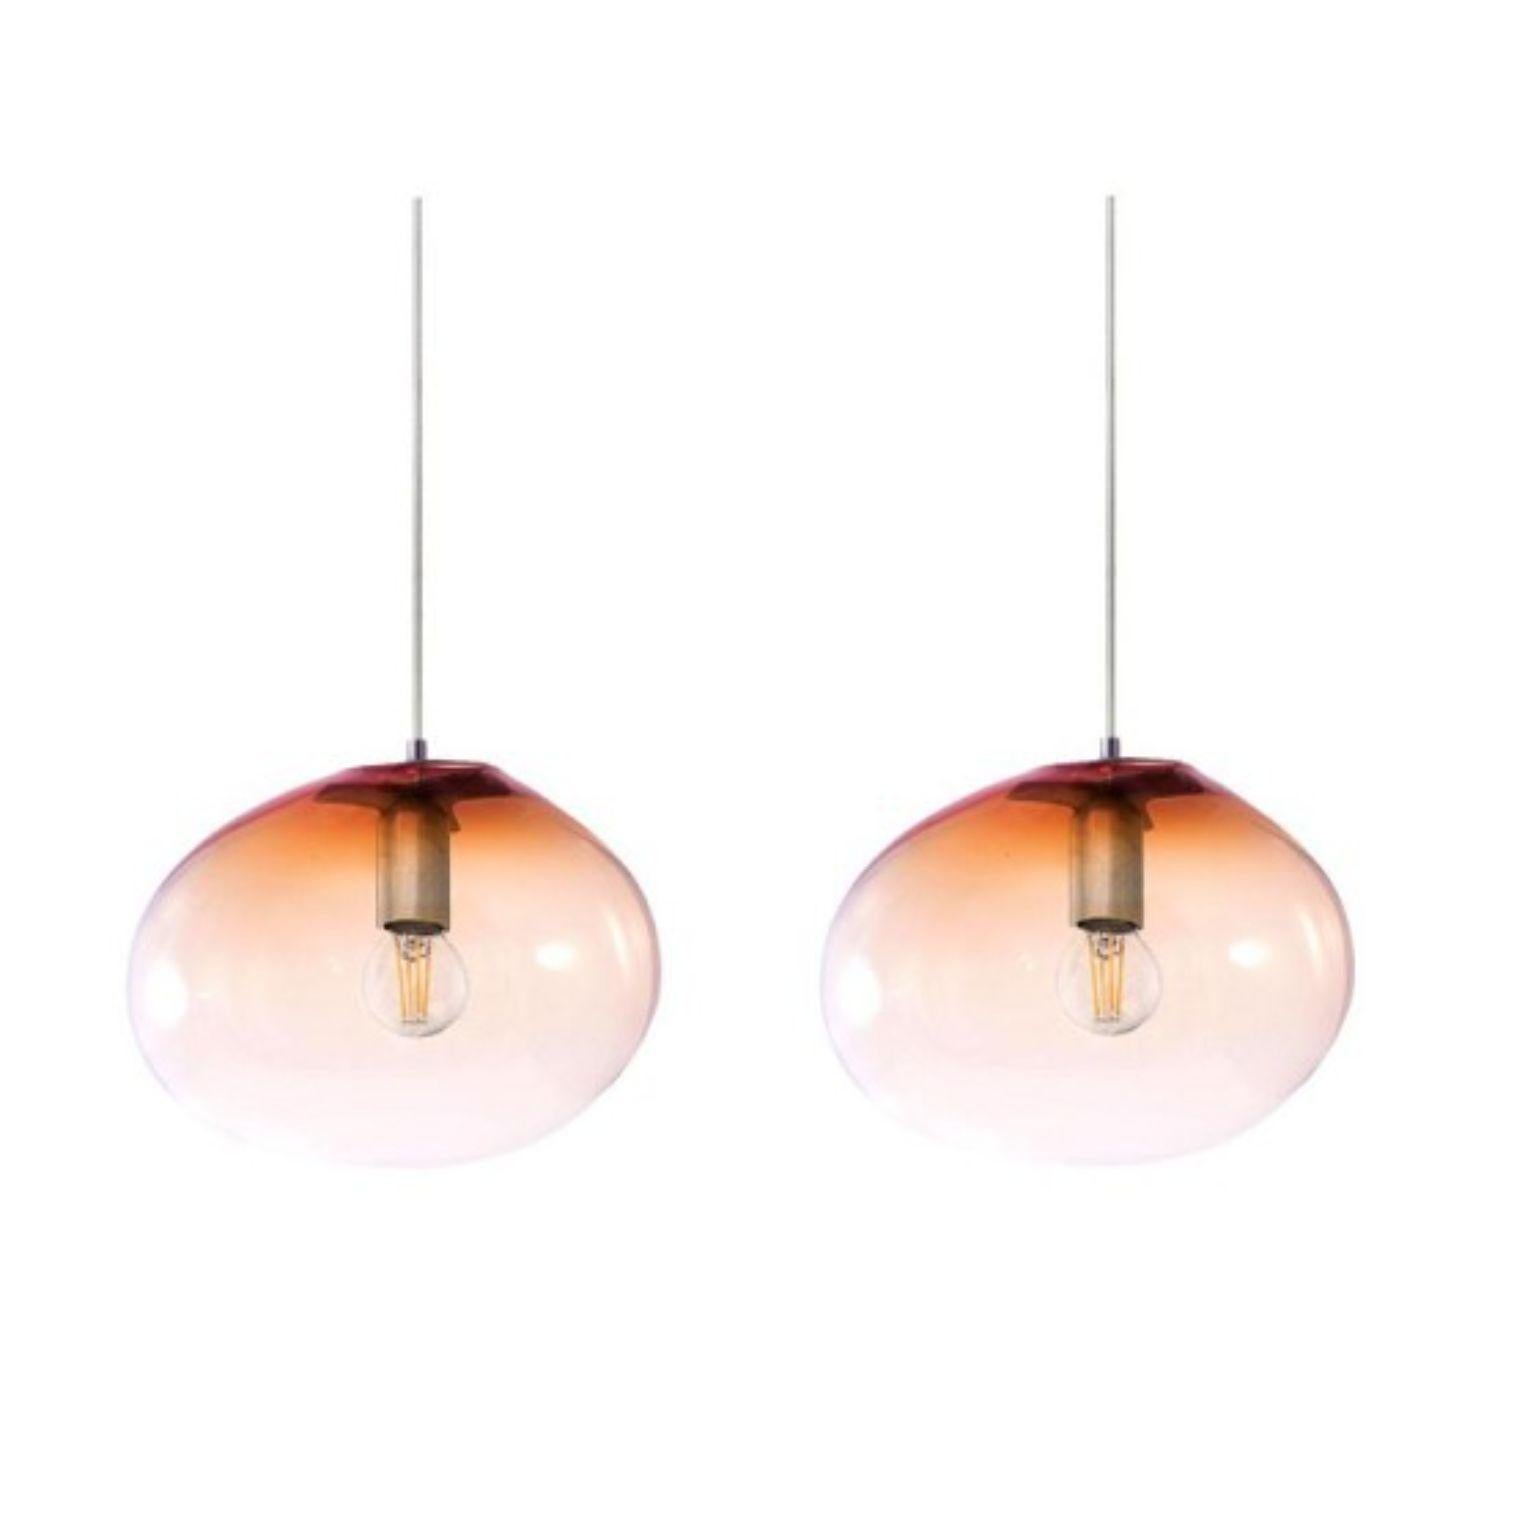 Set of 2 Planetoide Centaure coral pendants by Eloa.
No UL listed 
Material: Glass, steel, silver, LED bulb
Dimensions: D 30 x W 30 x H 250 cm
Also available in different colours and dimensions

All our lamps can be wired according to each country.